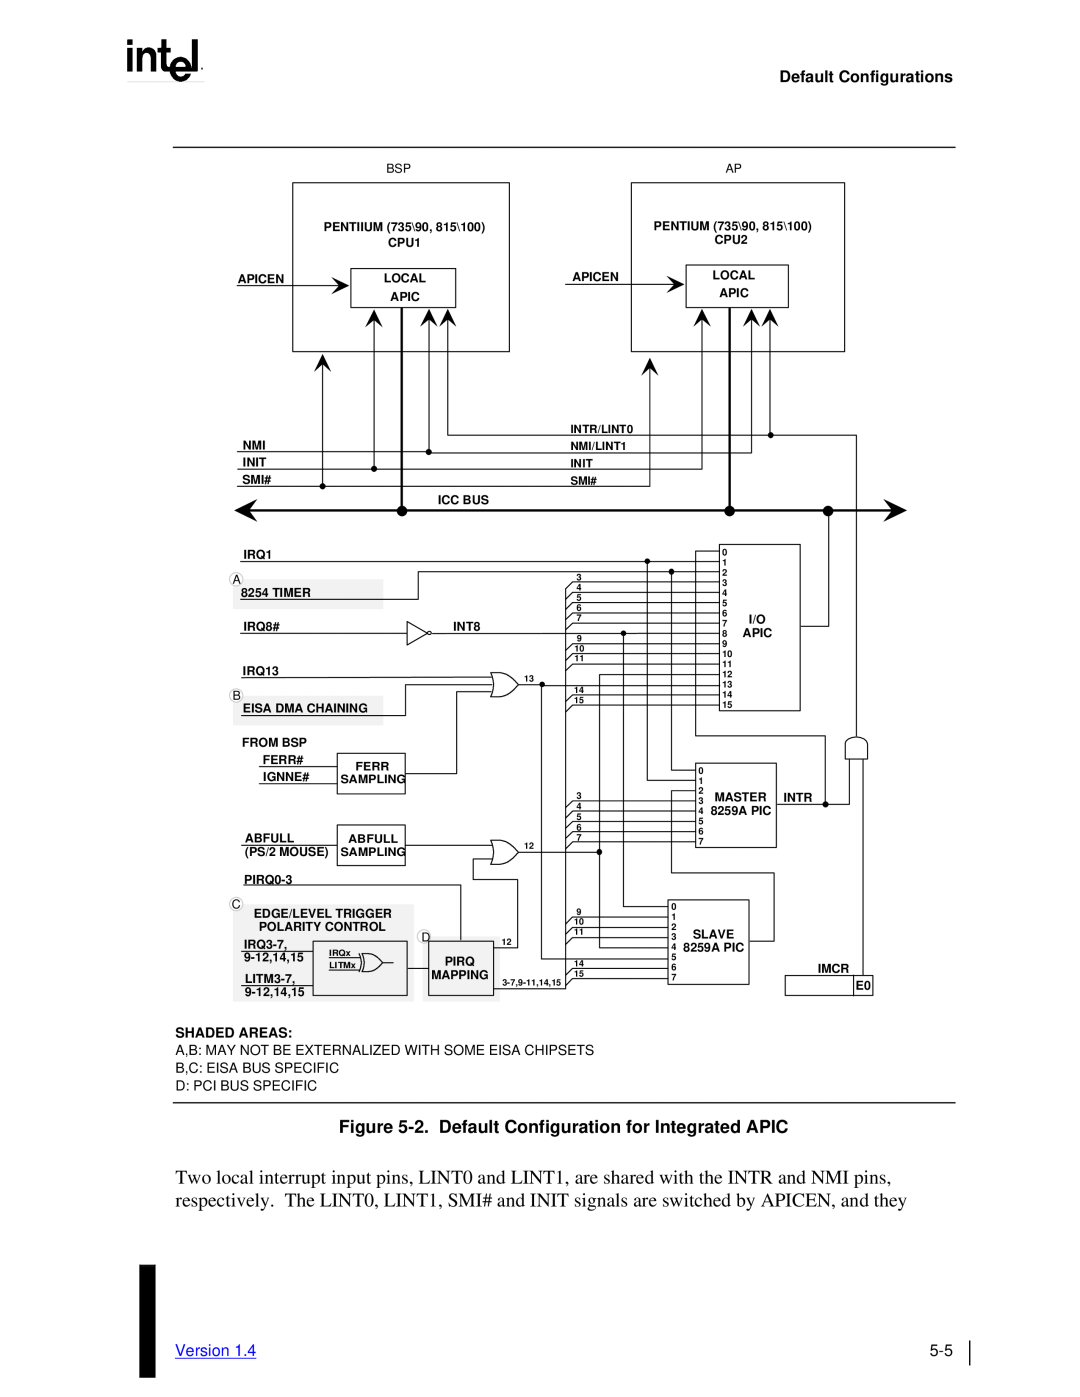 Intel MultiProcessor manual Version, Shaded Areas, B,C Eisa Bus Specific D Pci Bus Specific, Mark 